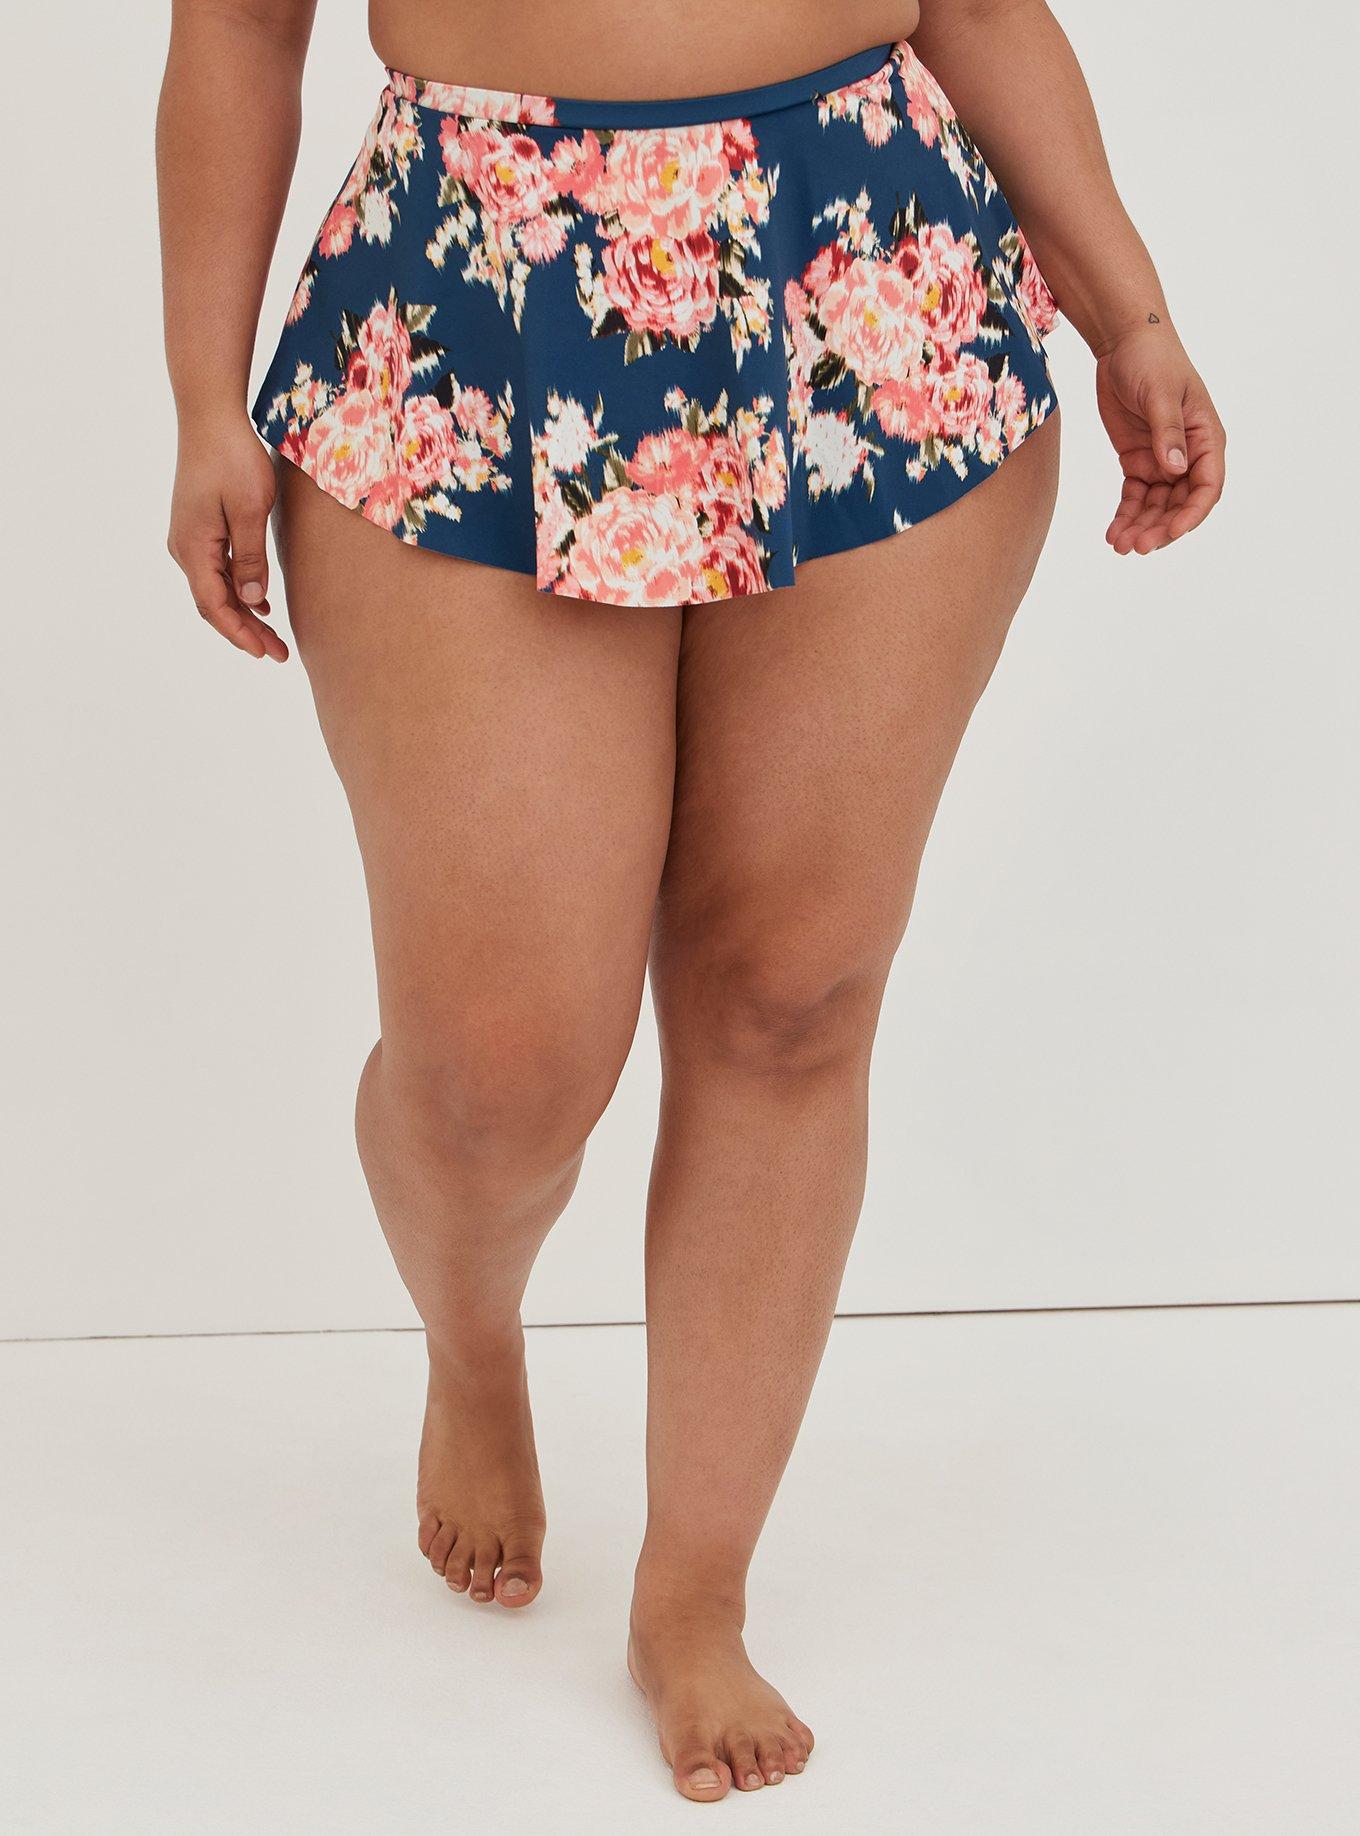 Plus Size - High-Rise High-Low Swim Skirt With Brief - Torrid